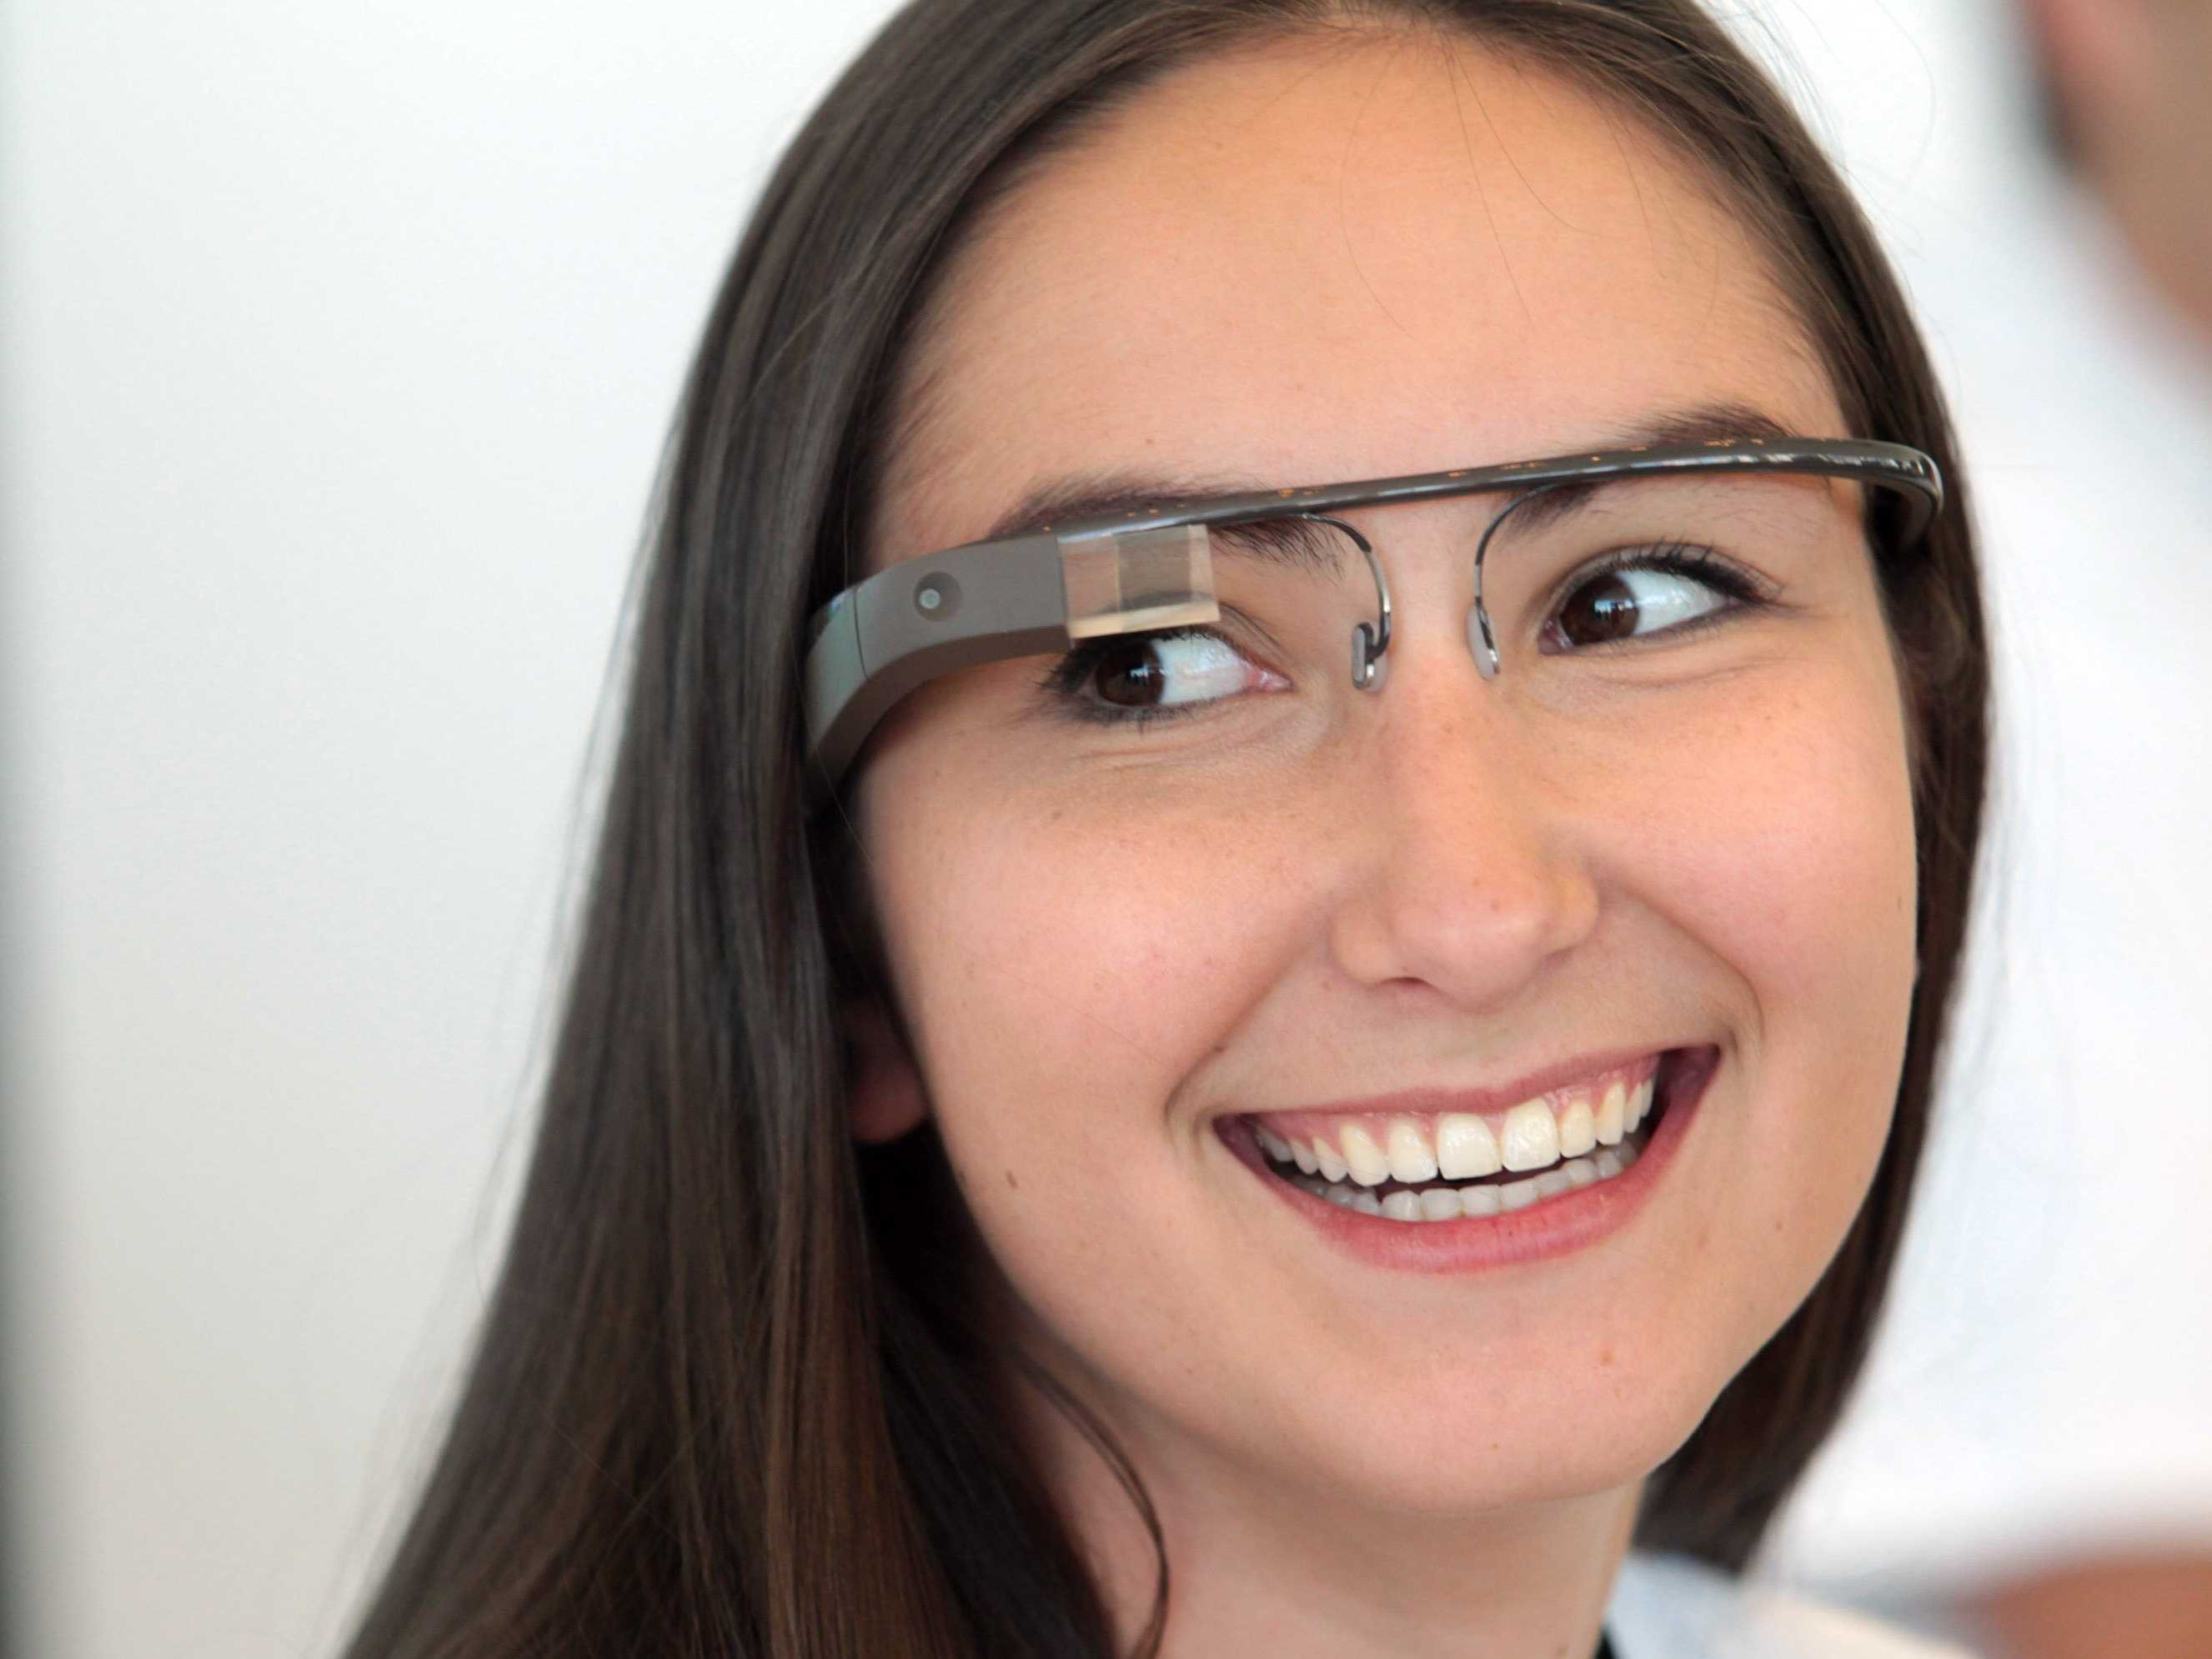 Girl wearing Google glass - Google glass pictures gallery 